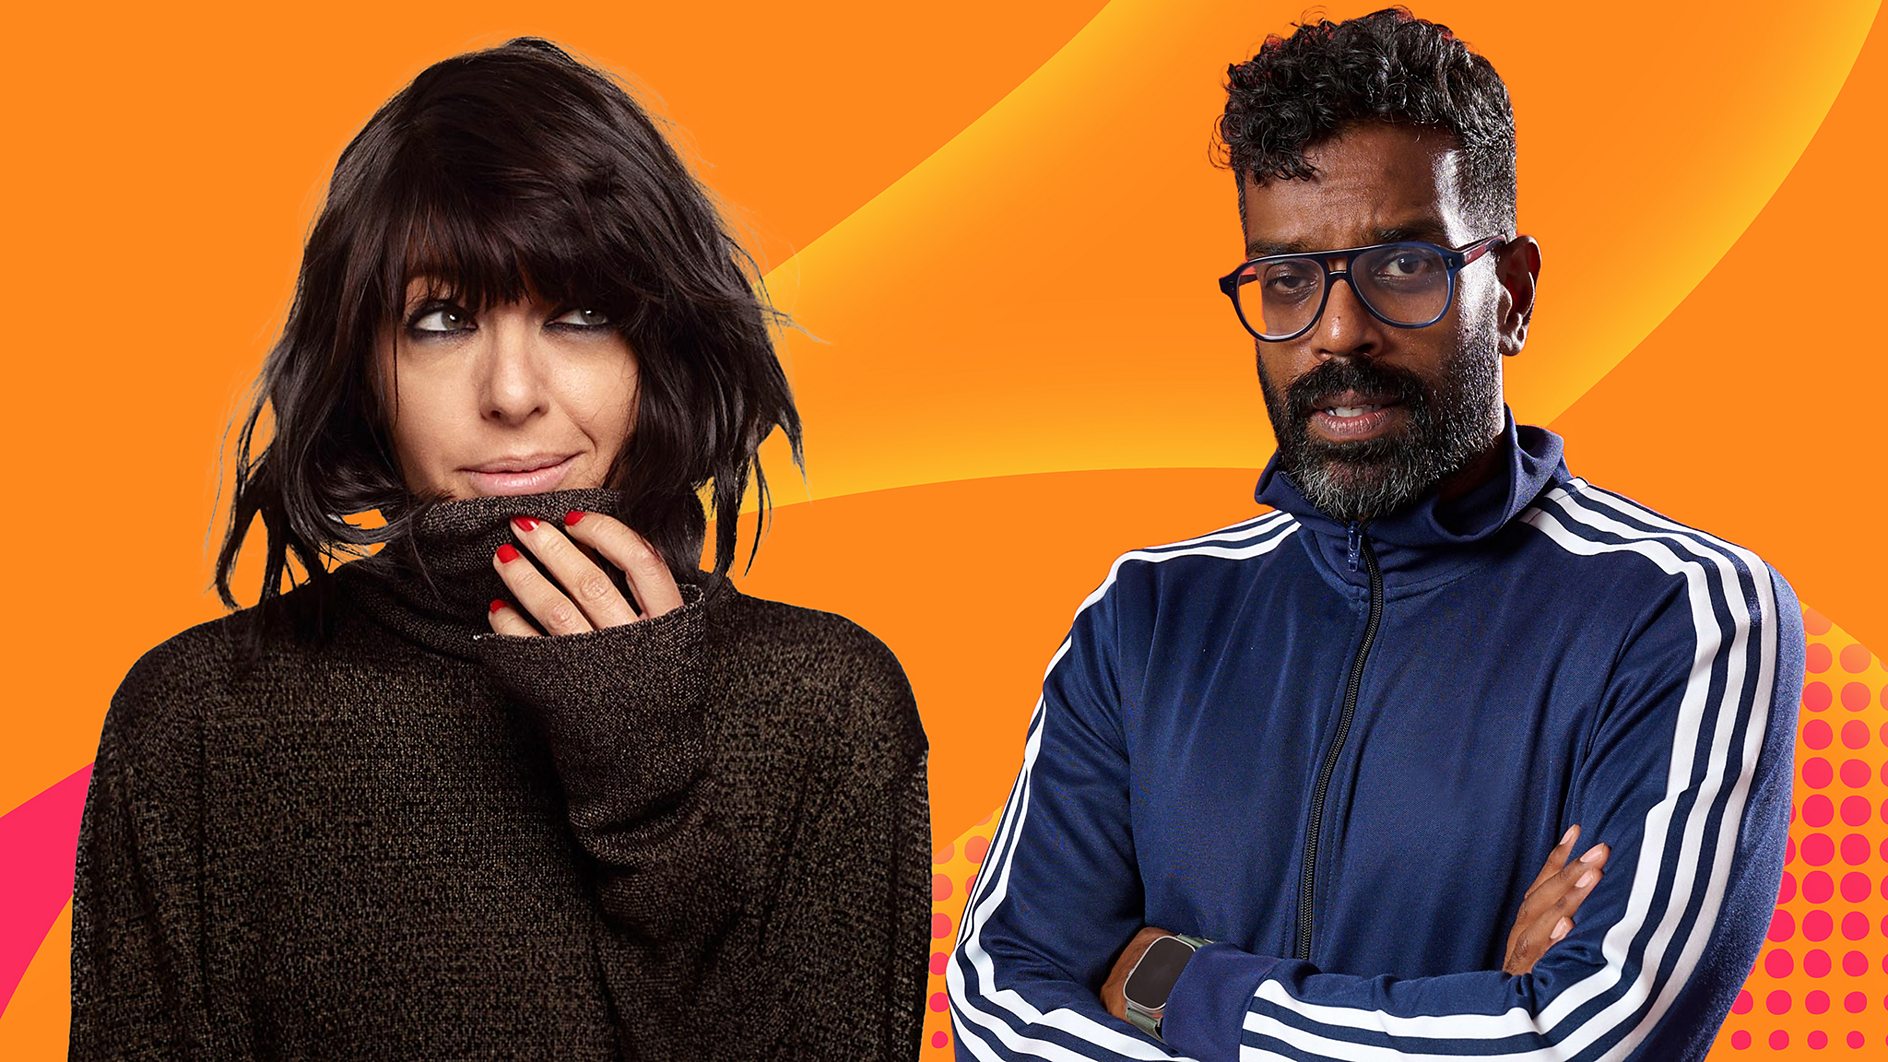 Claudia Winkleman decides to step down from her Saturday show on BBC Radio 2